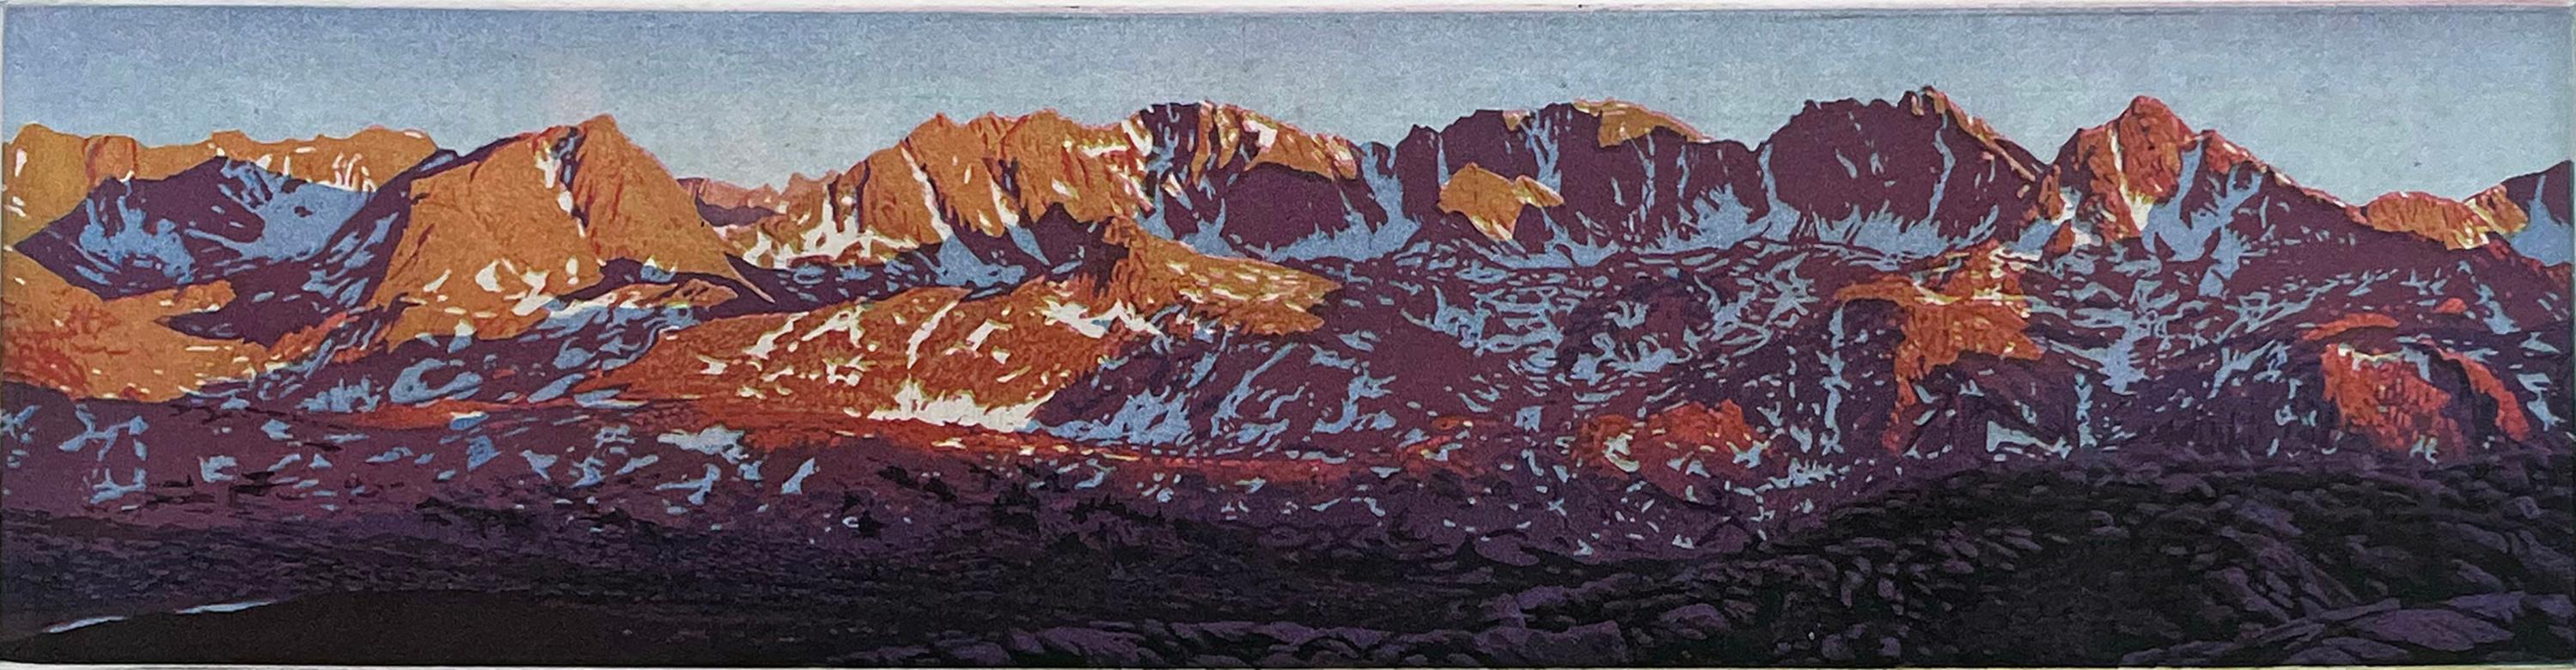 Signed, titled and numbered by the artist.
Image size: 4 x 16 inches

Glacier Divide from Humphreys Basin, John Muir Wilderness, California. Scene of sunlight on snow-capped mountain ridges along the Pacific coast. Signed and numbered etching and